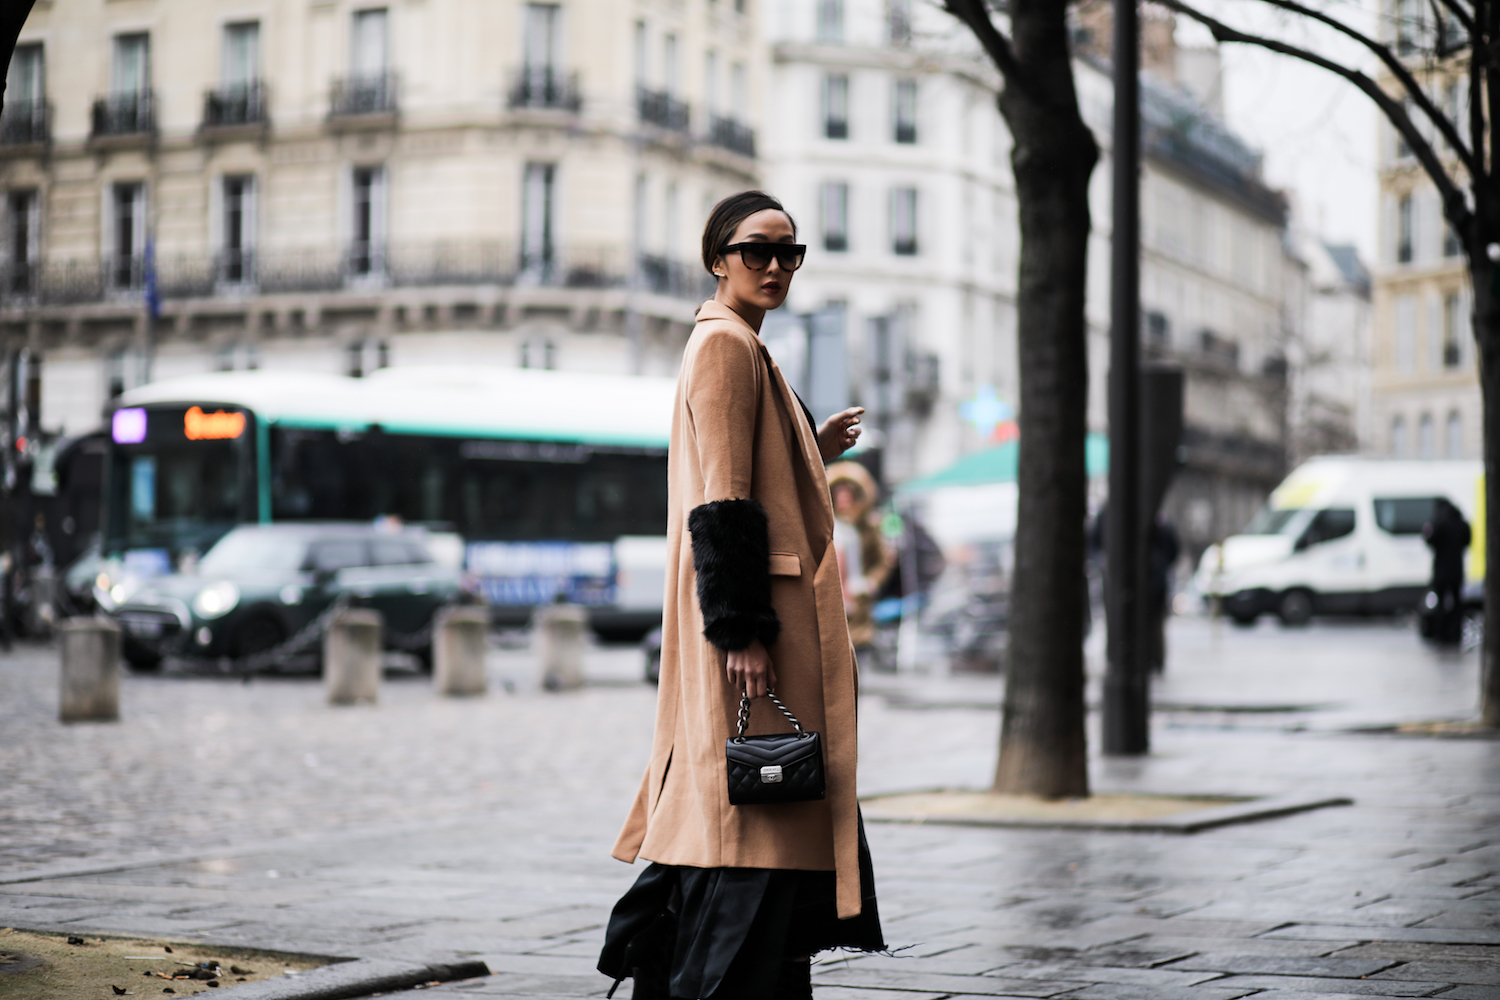 The Statement Coat - The Chriselle Factor